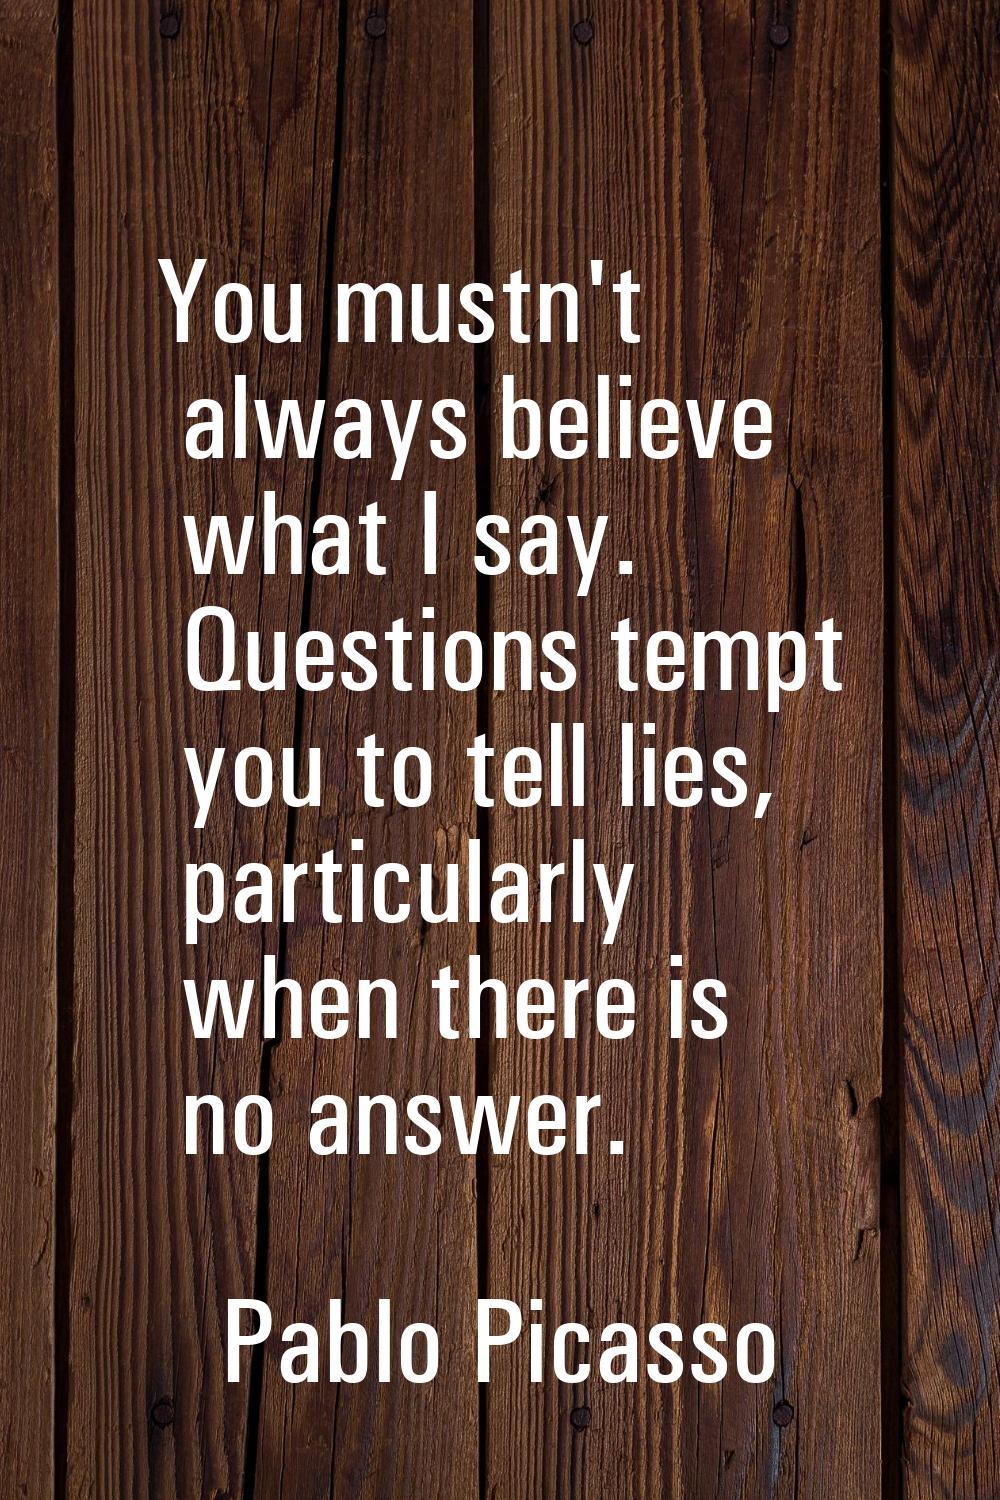 You mustn't always believe what I say. Questions tempt you to tell lies, particularly when there is